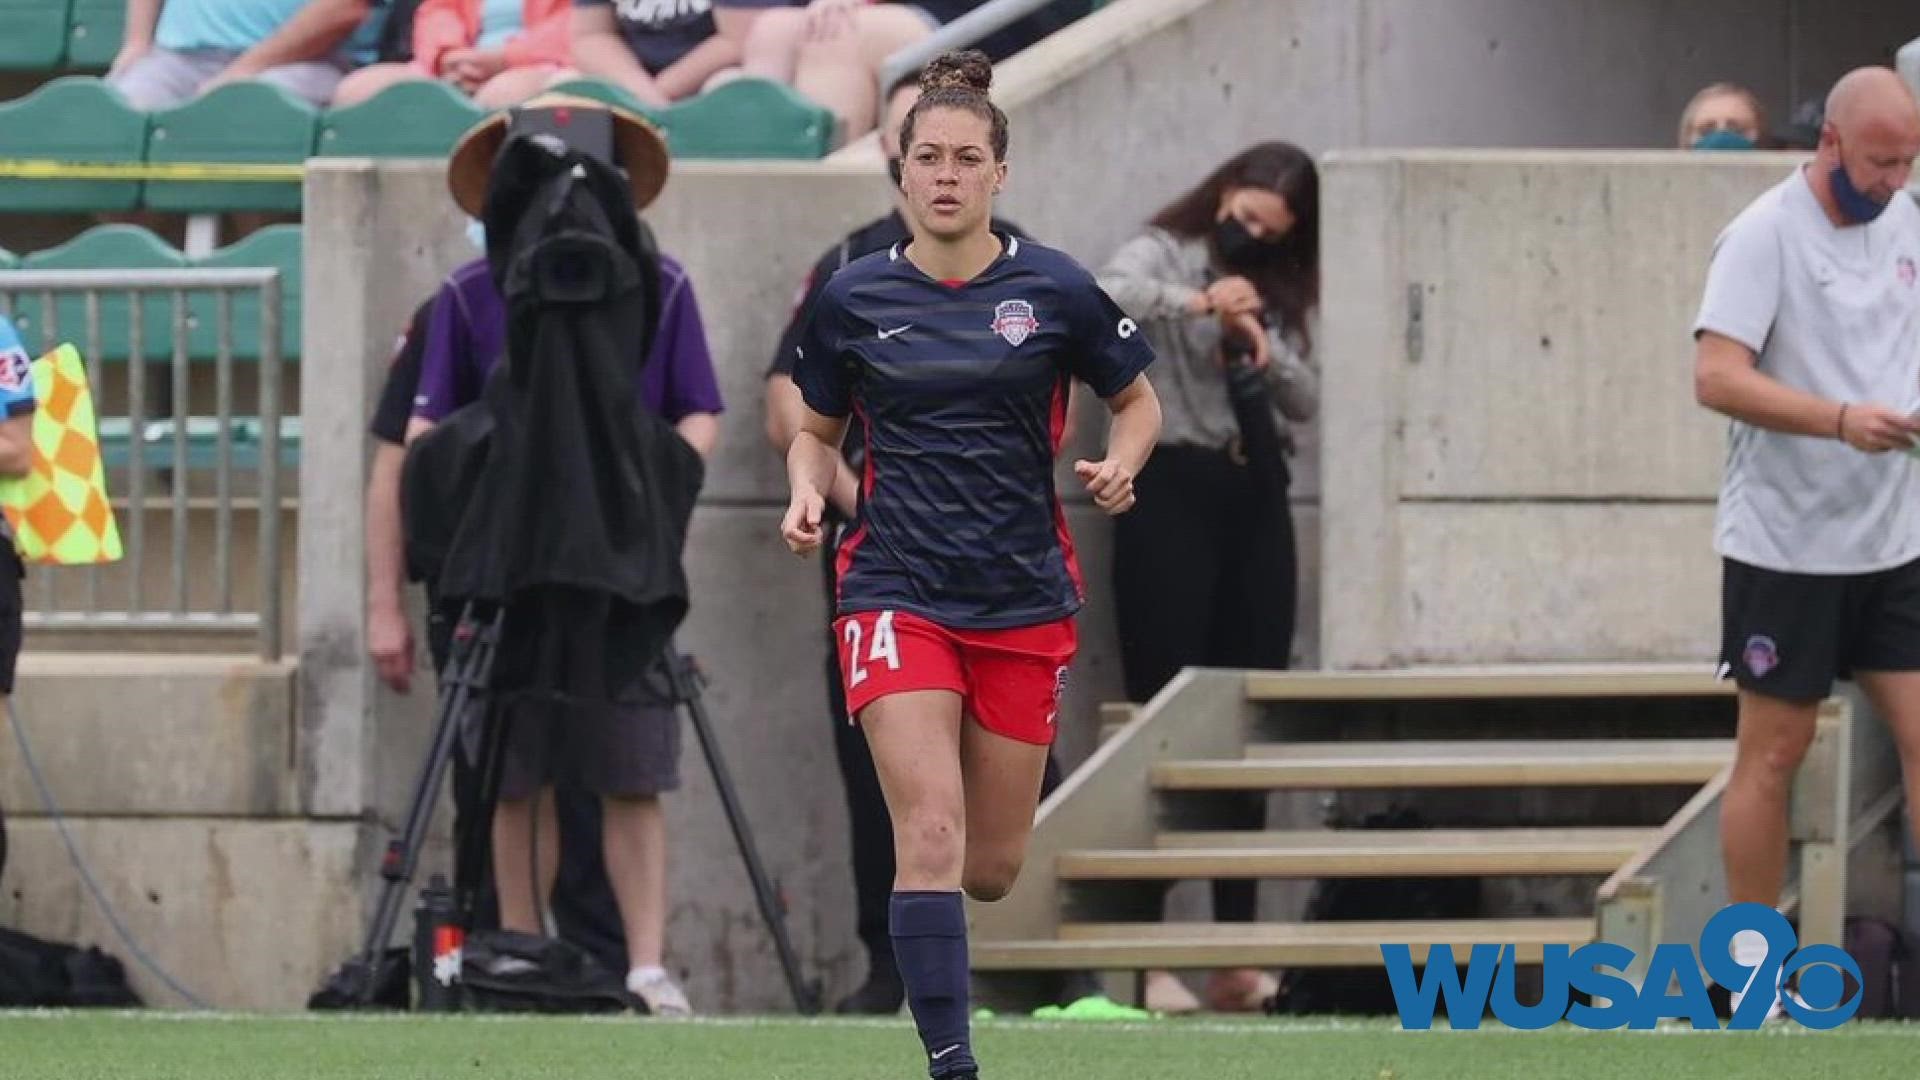 The Washington Spirit will play in the NWSL championship game against the Chicago Red Stars.